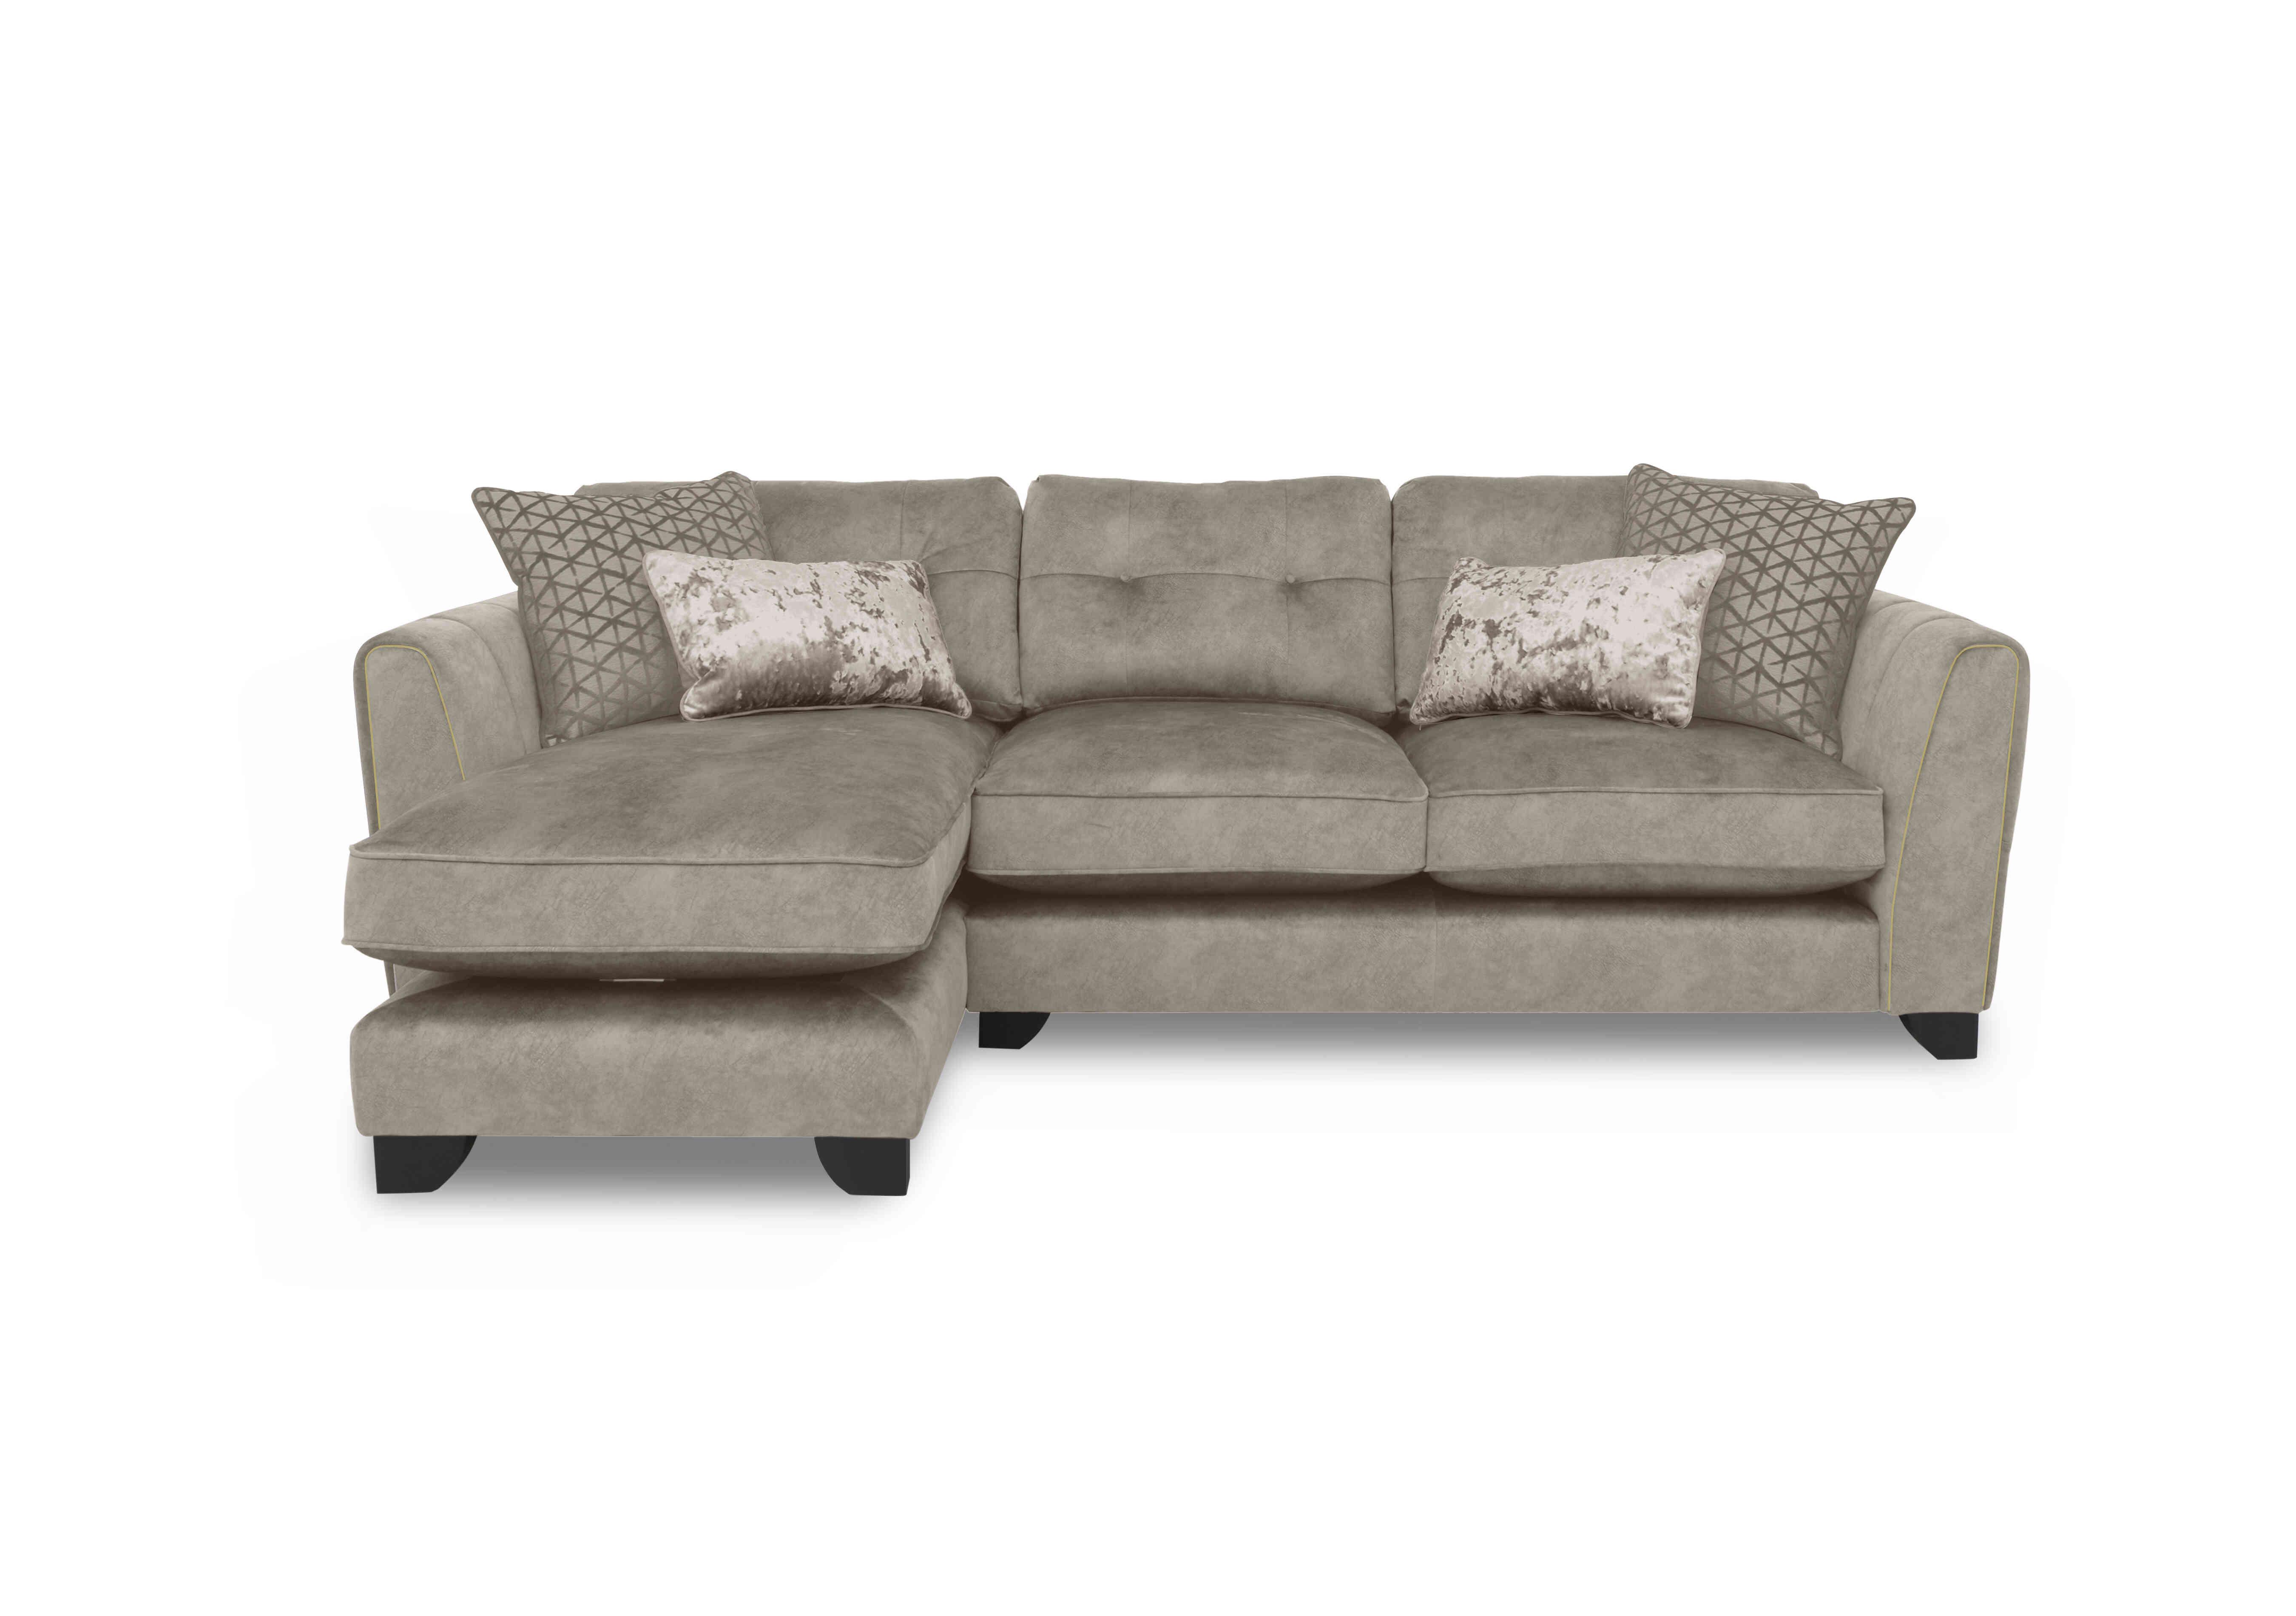 Ariana Fabric Classic Back Chaise End Sofa in Dapple Oyster Brass Insert on Furniture Village